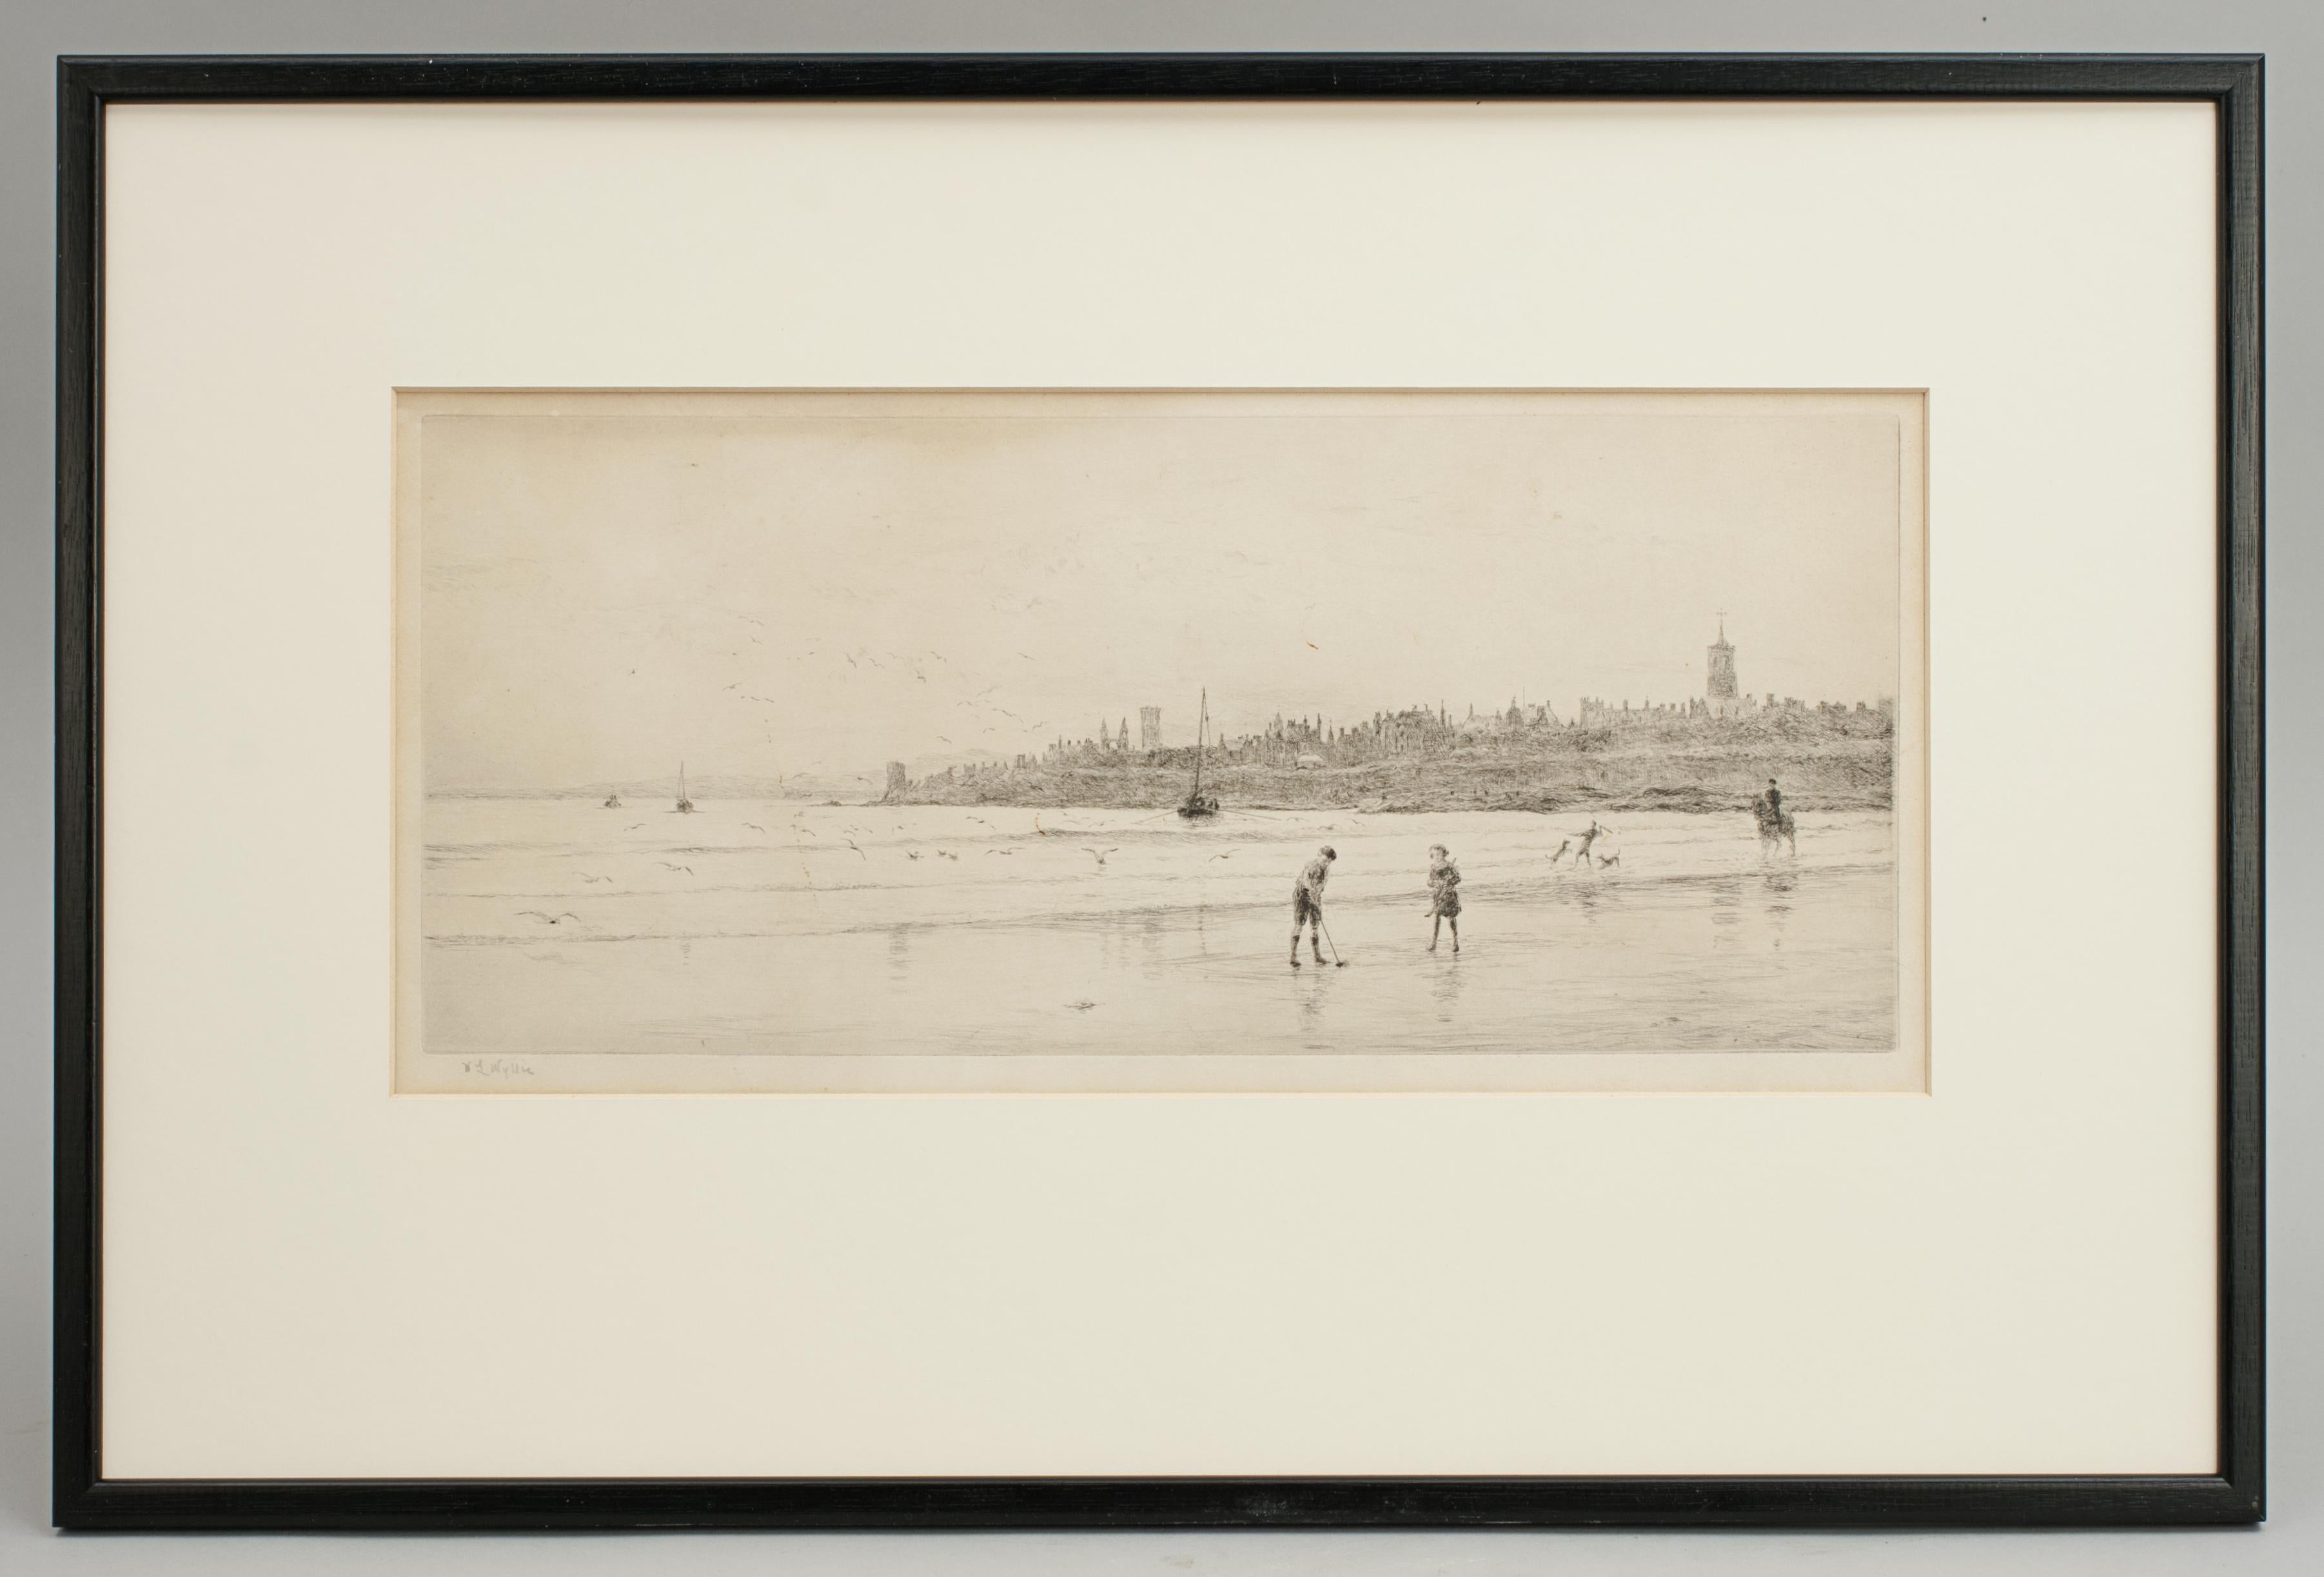 A very charming etching of two children playing golf on the beach at St Andrews, in the background is the town of St Andrews with the Castle & Cathedral prominent in the sky line. Framed in a new black frame and signed in pencil in the lower left